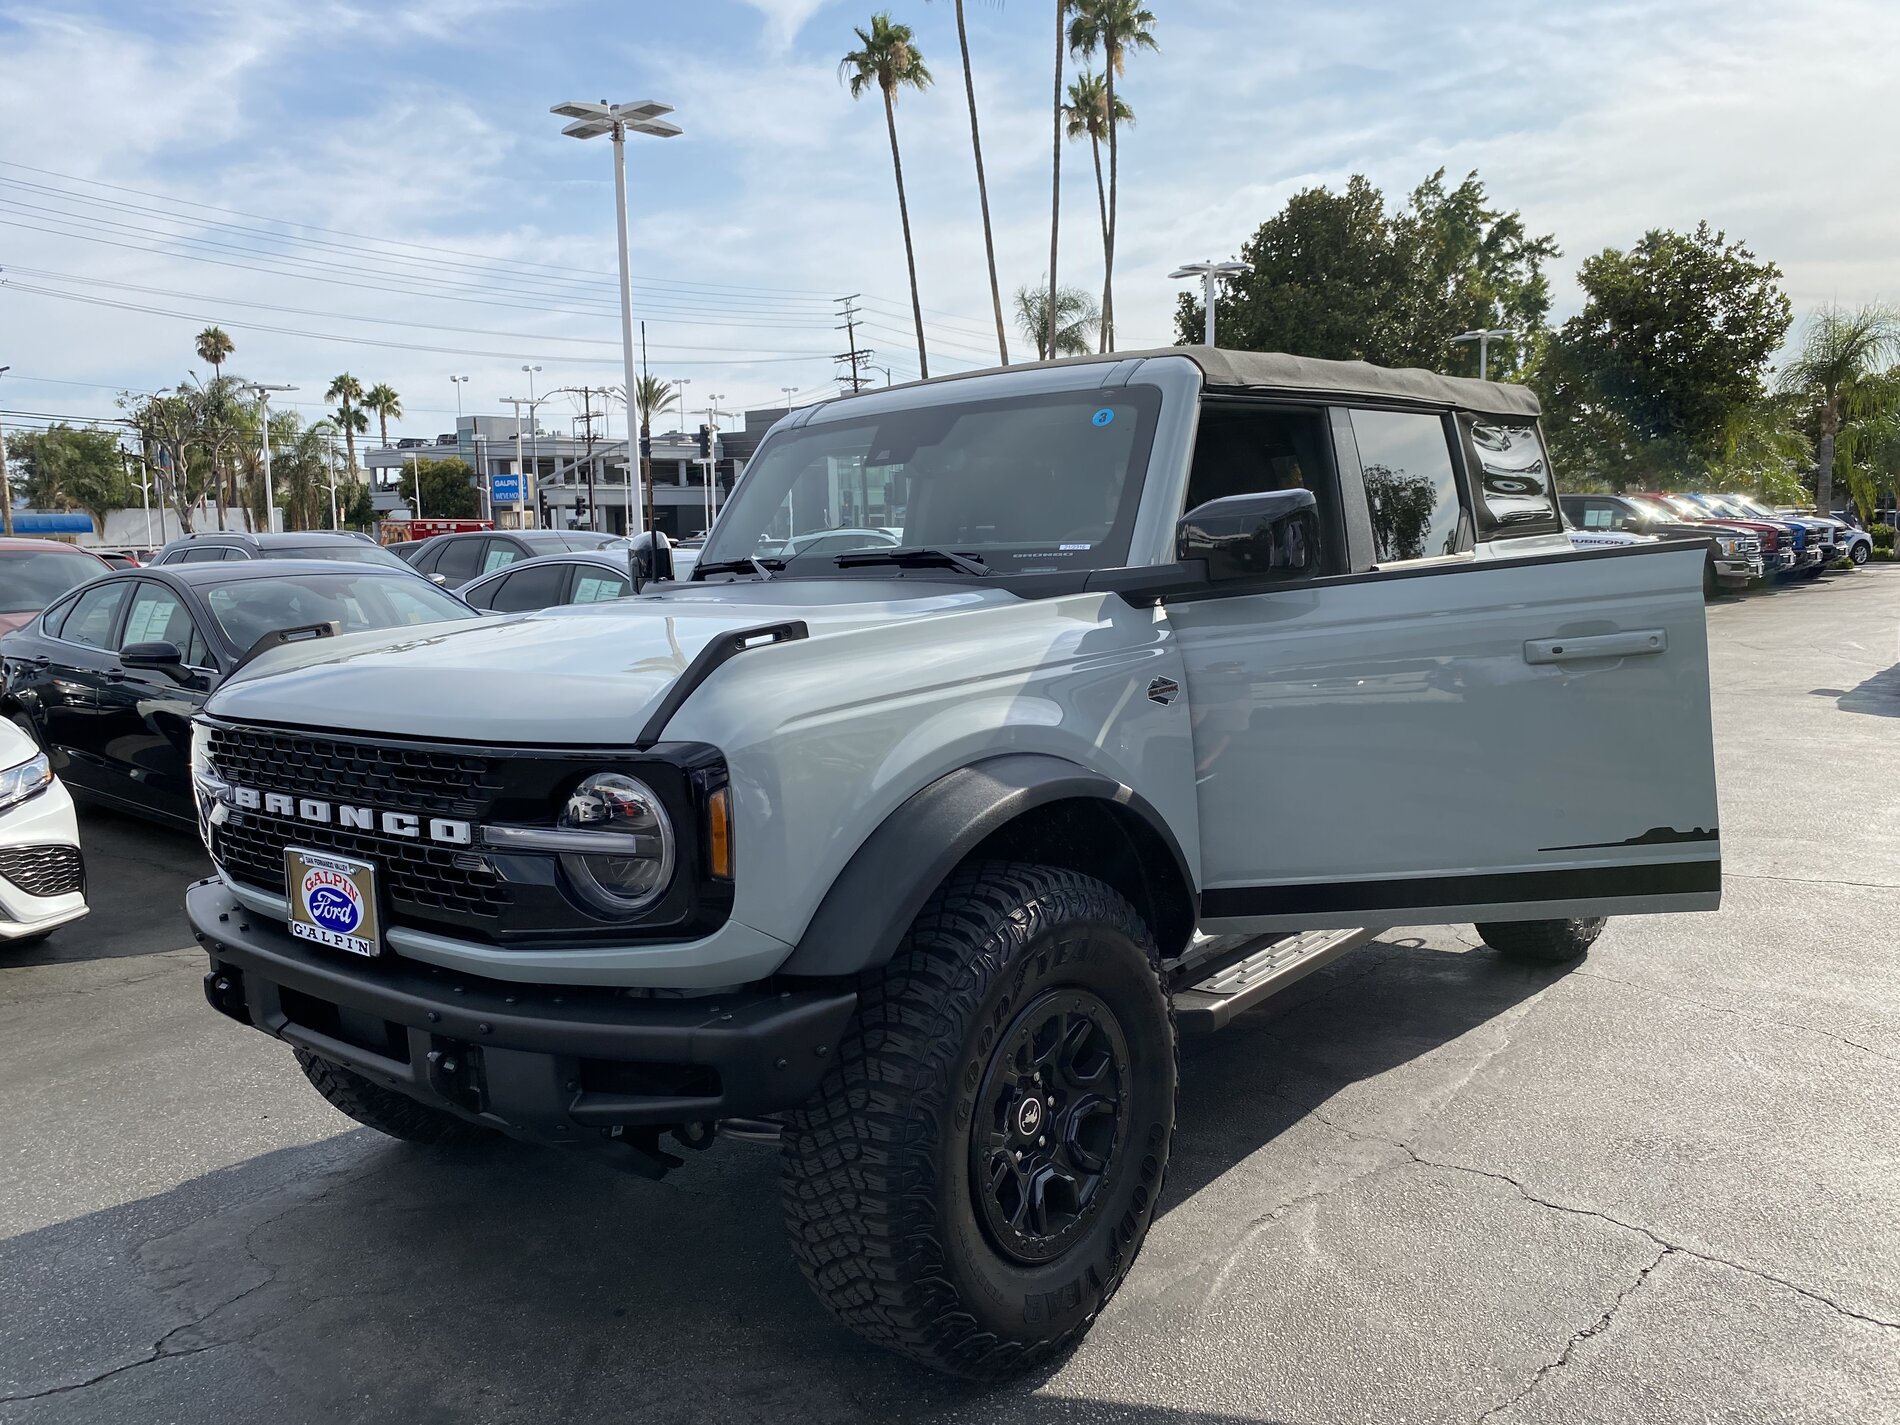 Ford Bronco Any Southern California deliveries? A932CB15-C11B-418E-BEF3-0003475B0FE4